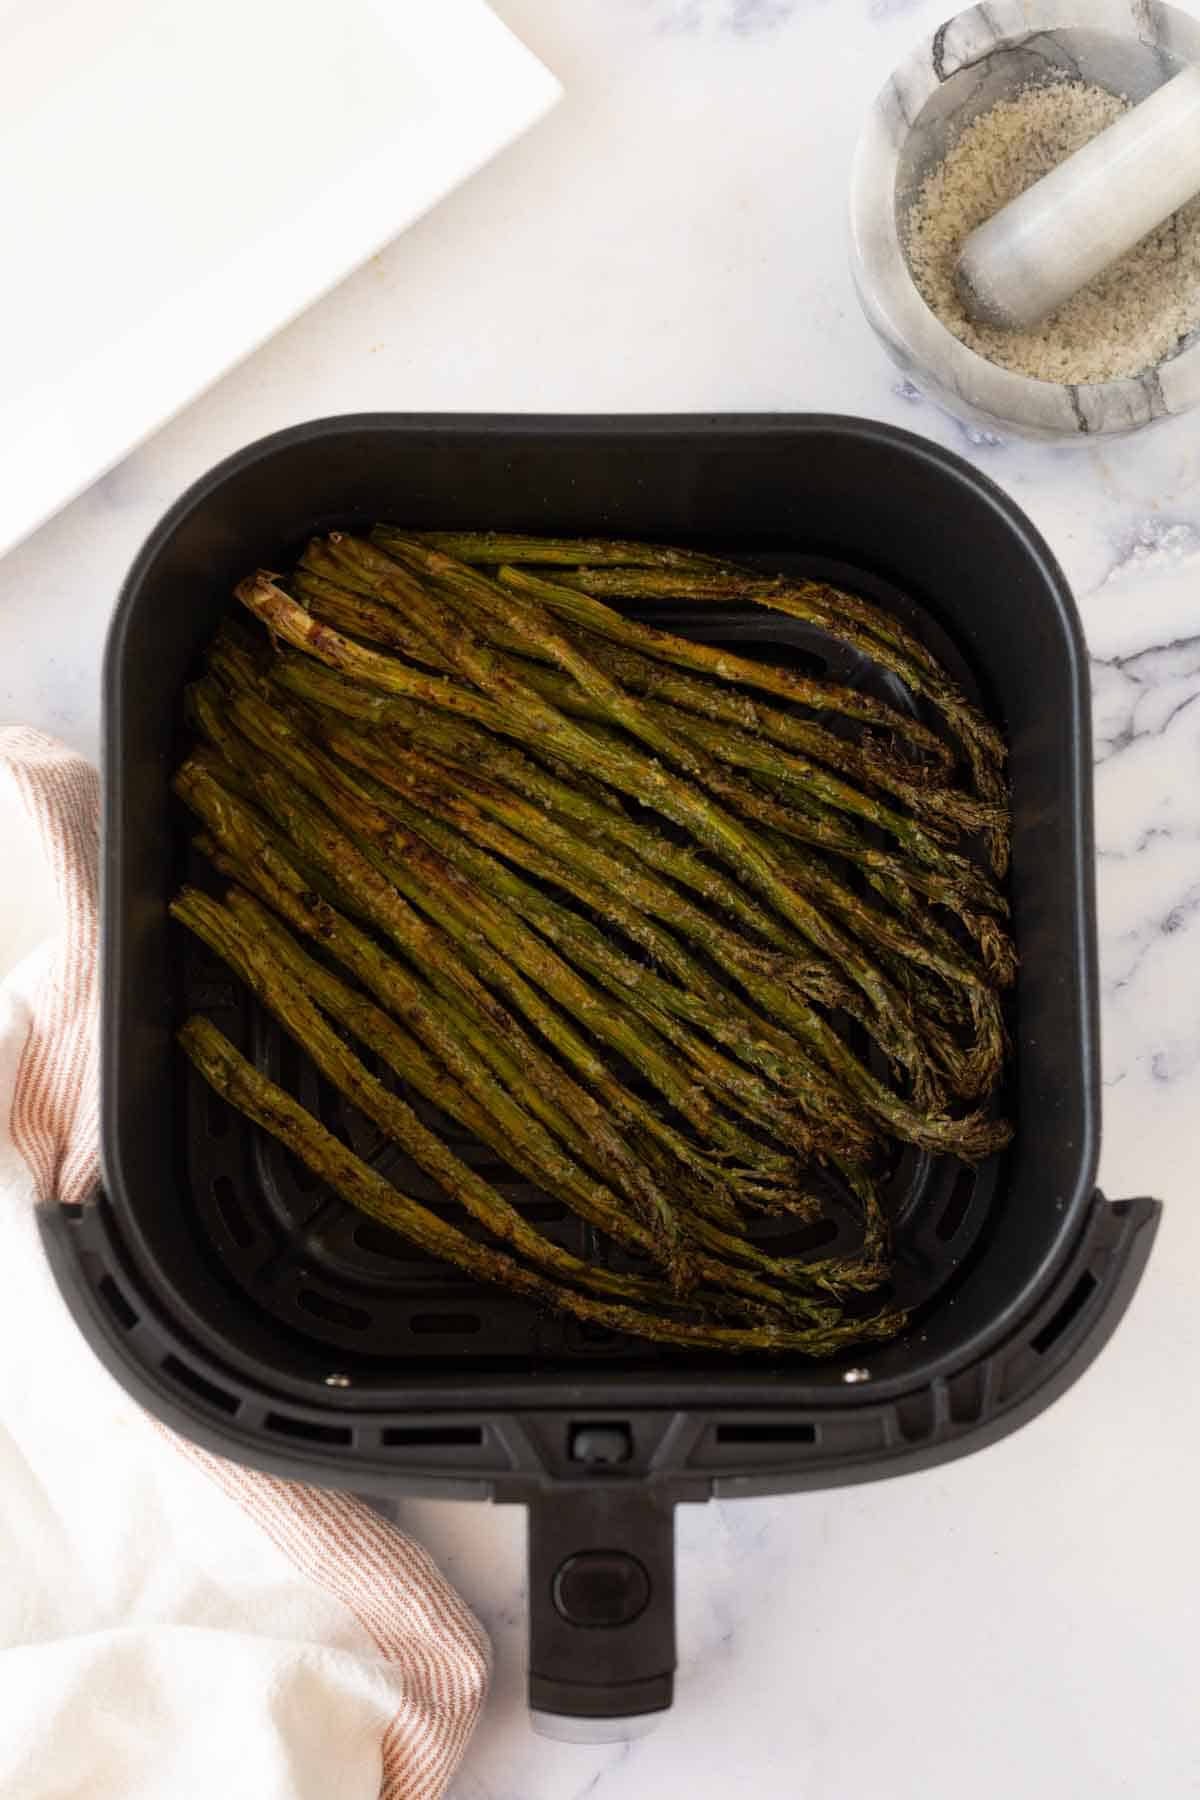 air fryer asparagus cooked in the basket